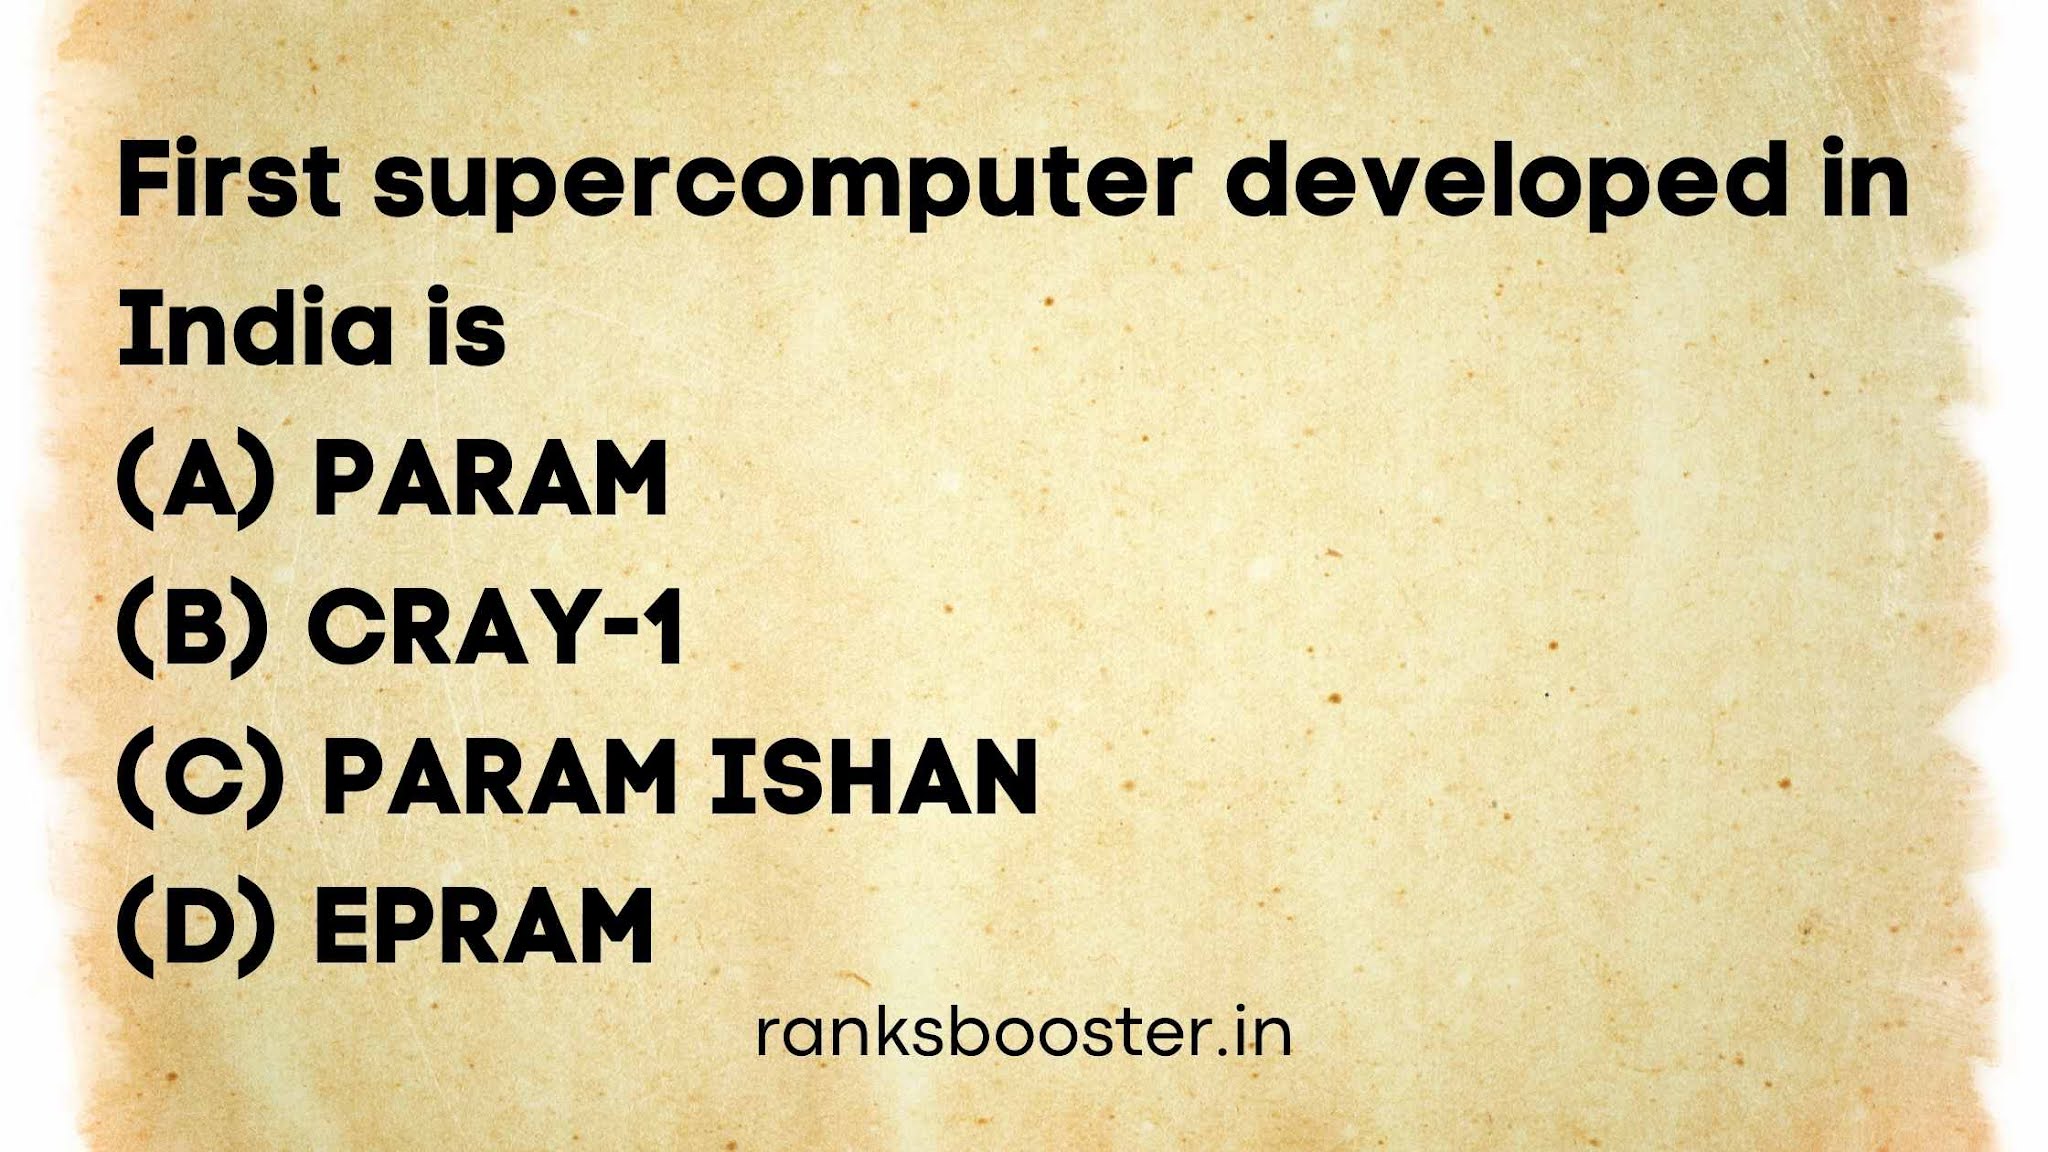 First supercomputer developed in India is   (A) PARAM   (B) CRAY-1   (C) PARAM ISHAN   (D) EPRAM